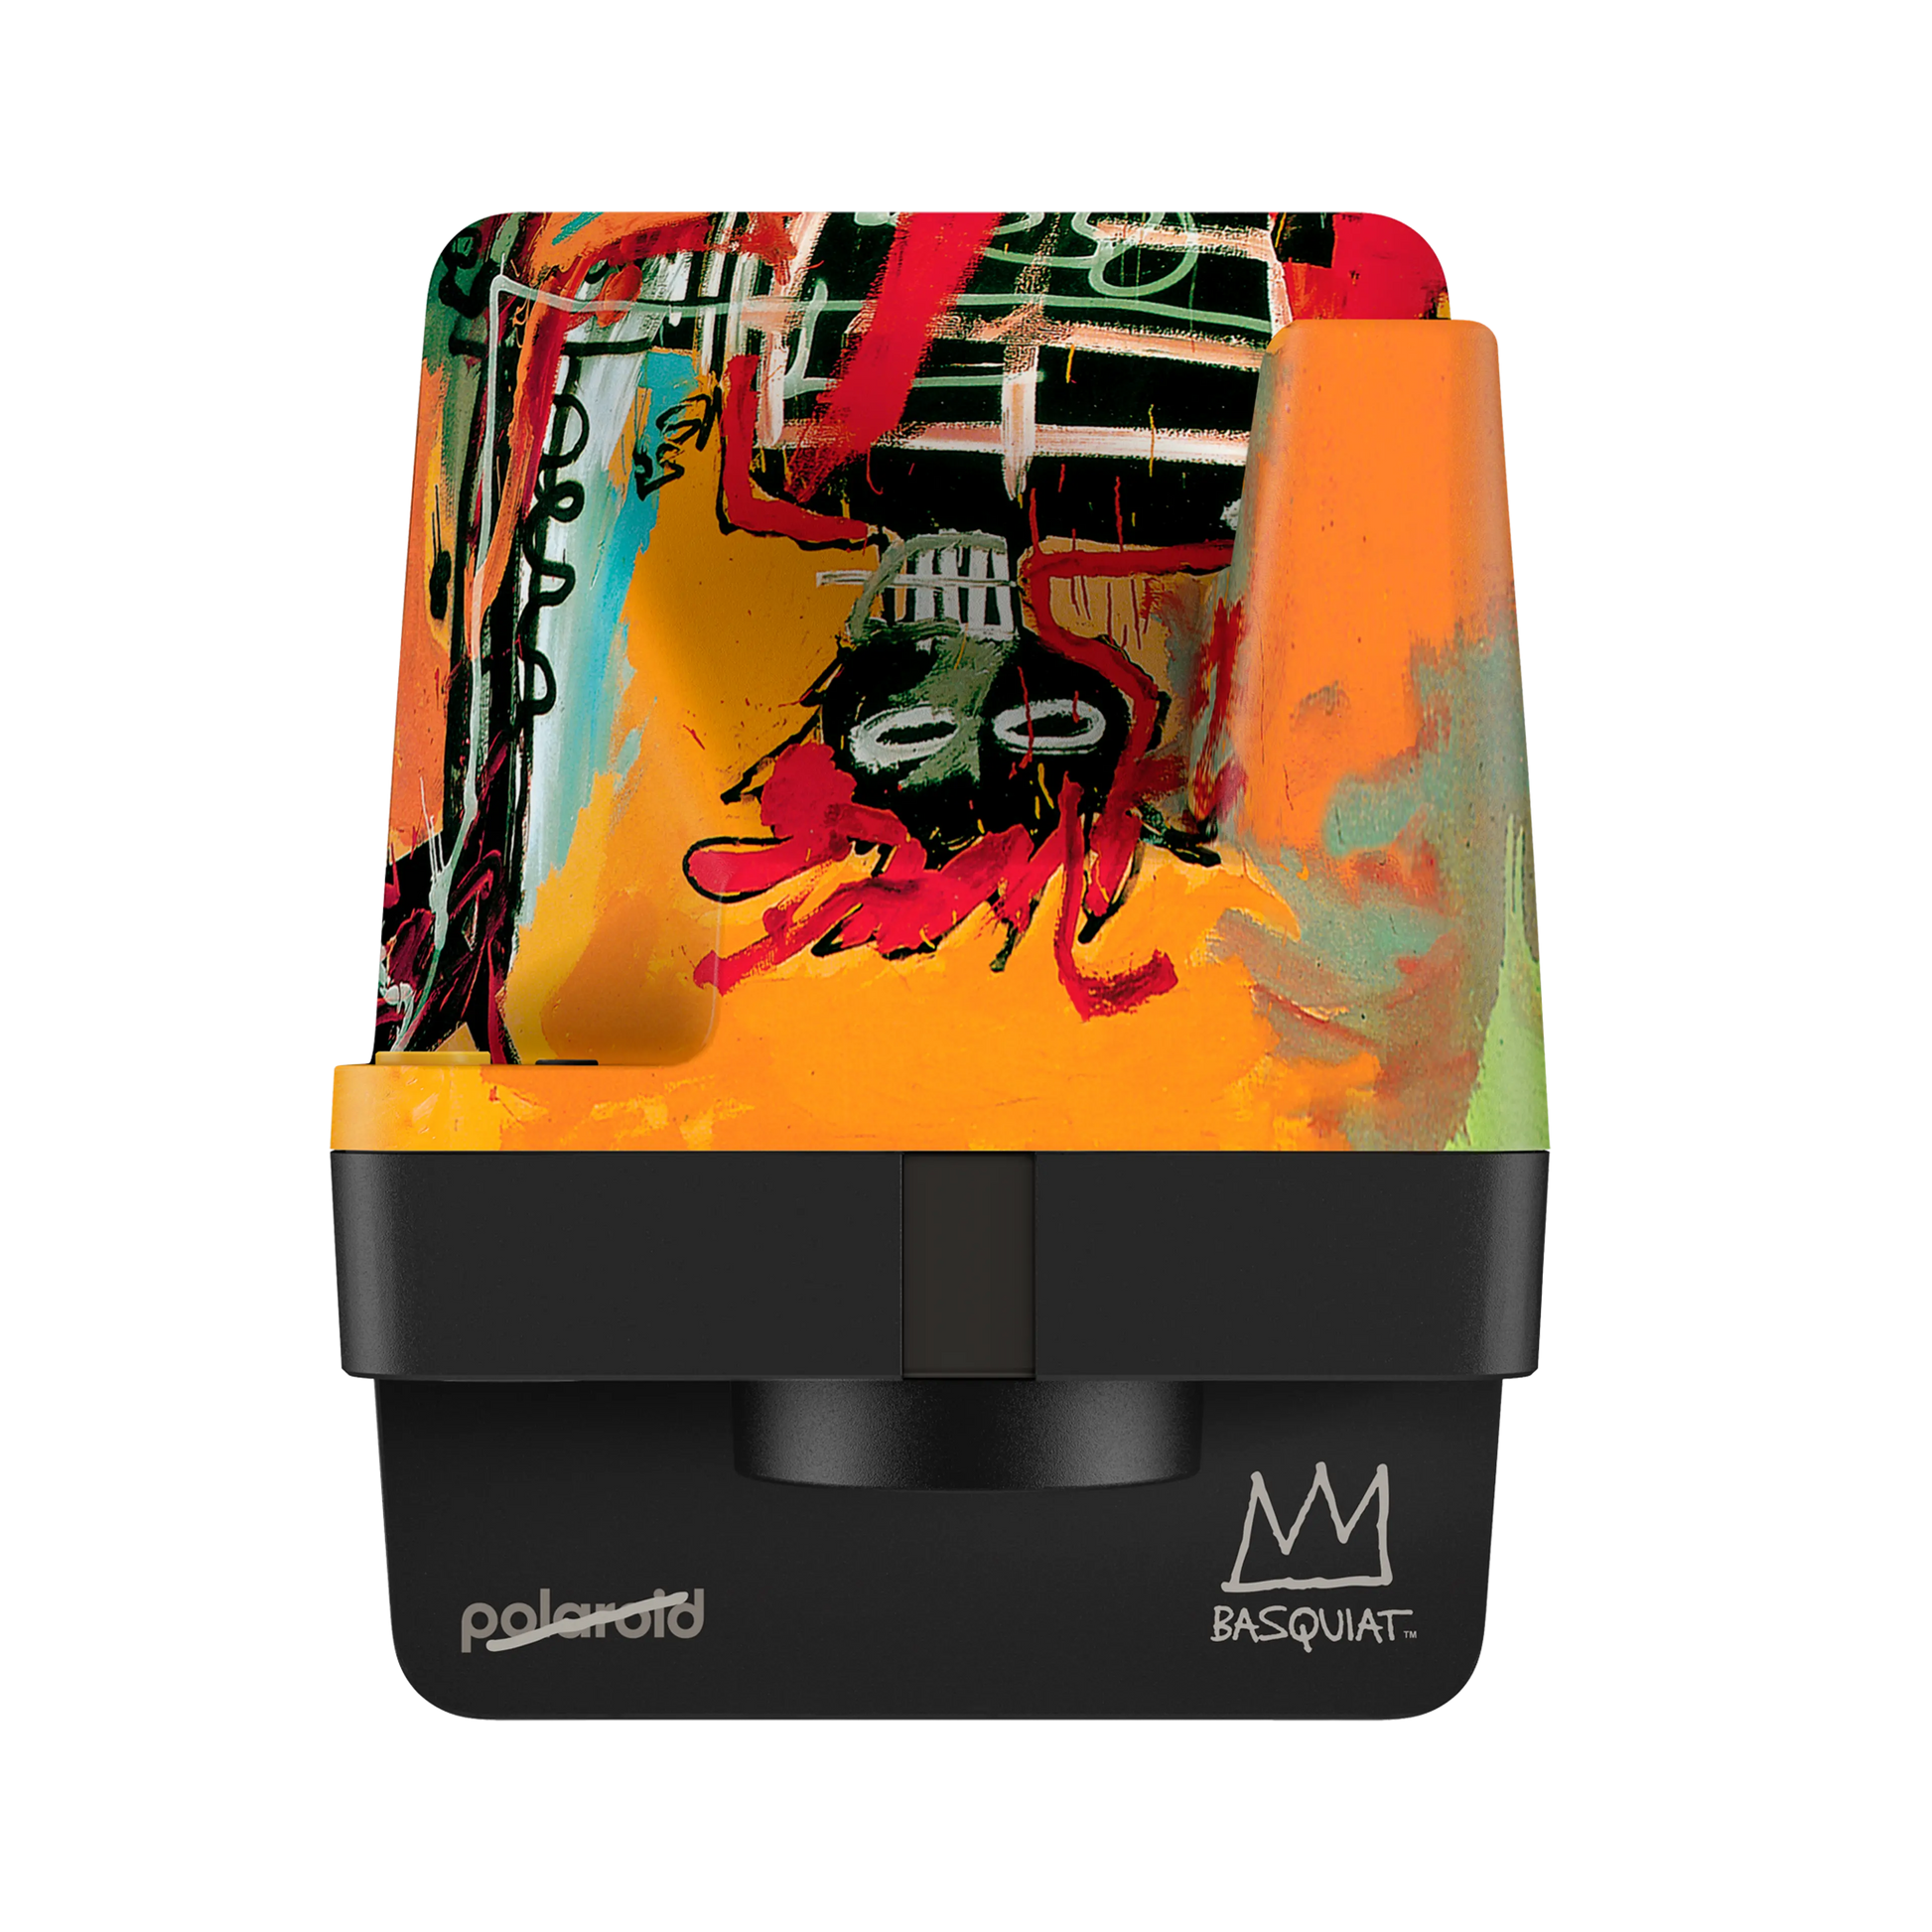 Polaroid Now Gen 2 i-Type Instant Film Camera - Basquiat Edition top down view mexico